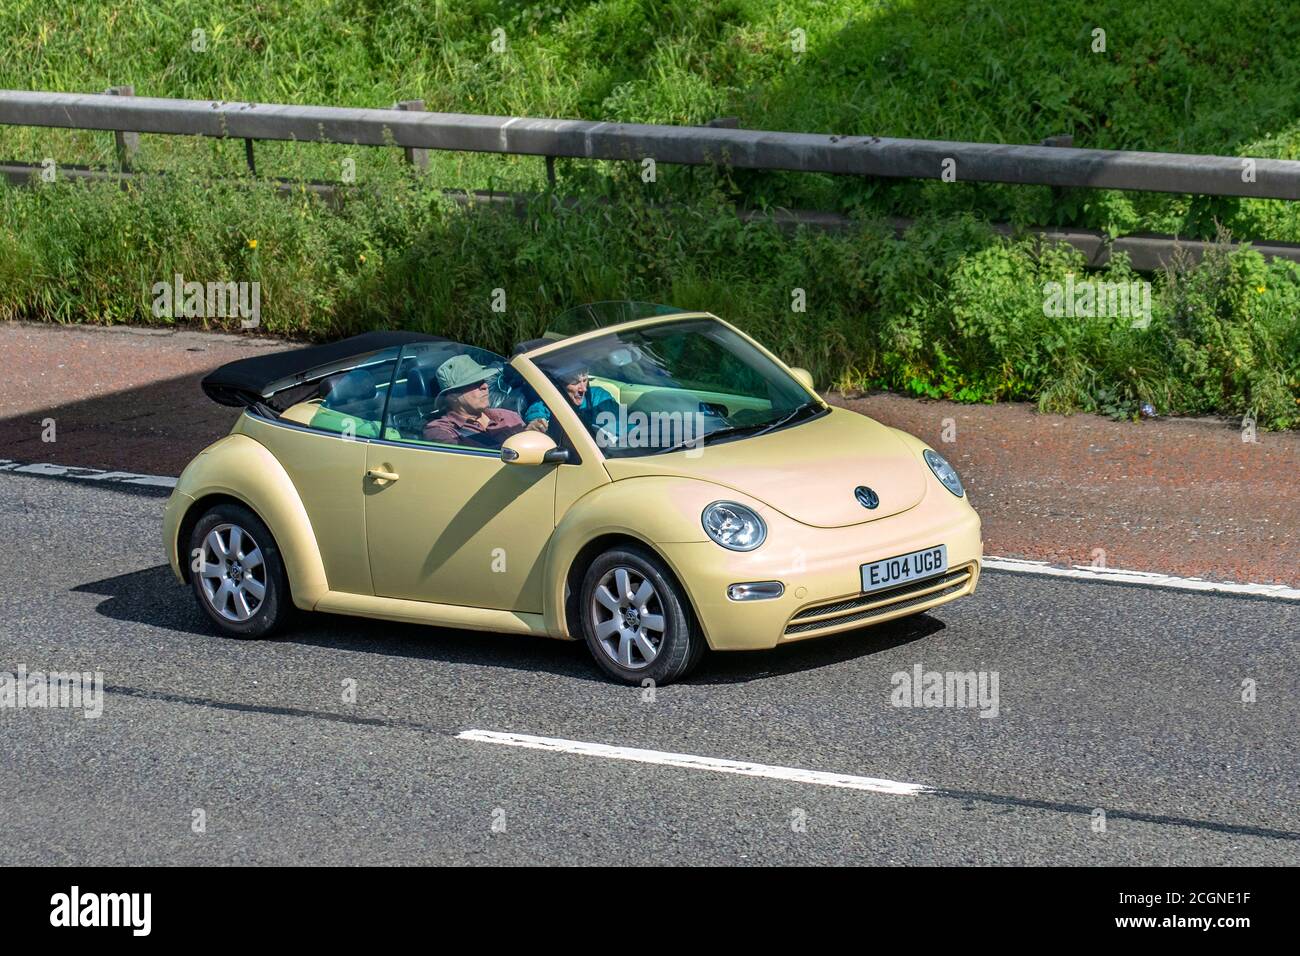 2004 yellow faded paint on VW Volkswagen Beetle Cabriolet; Vehicular traffic moving vehicles, driving vehicle on UK roads, motors, motoring on the M6 motorway highway Stock Photo